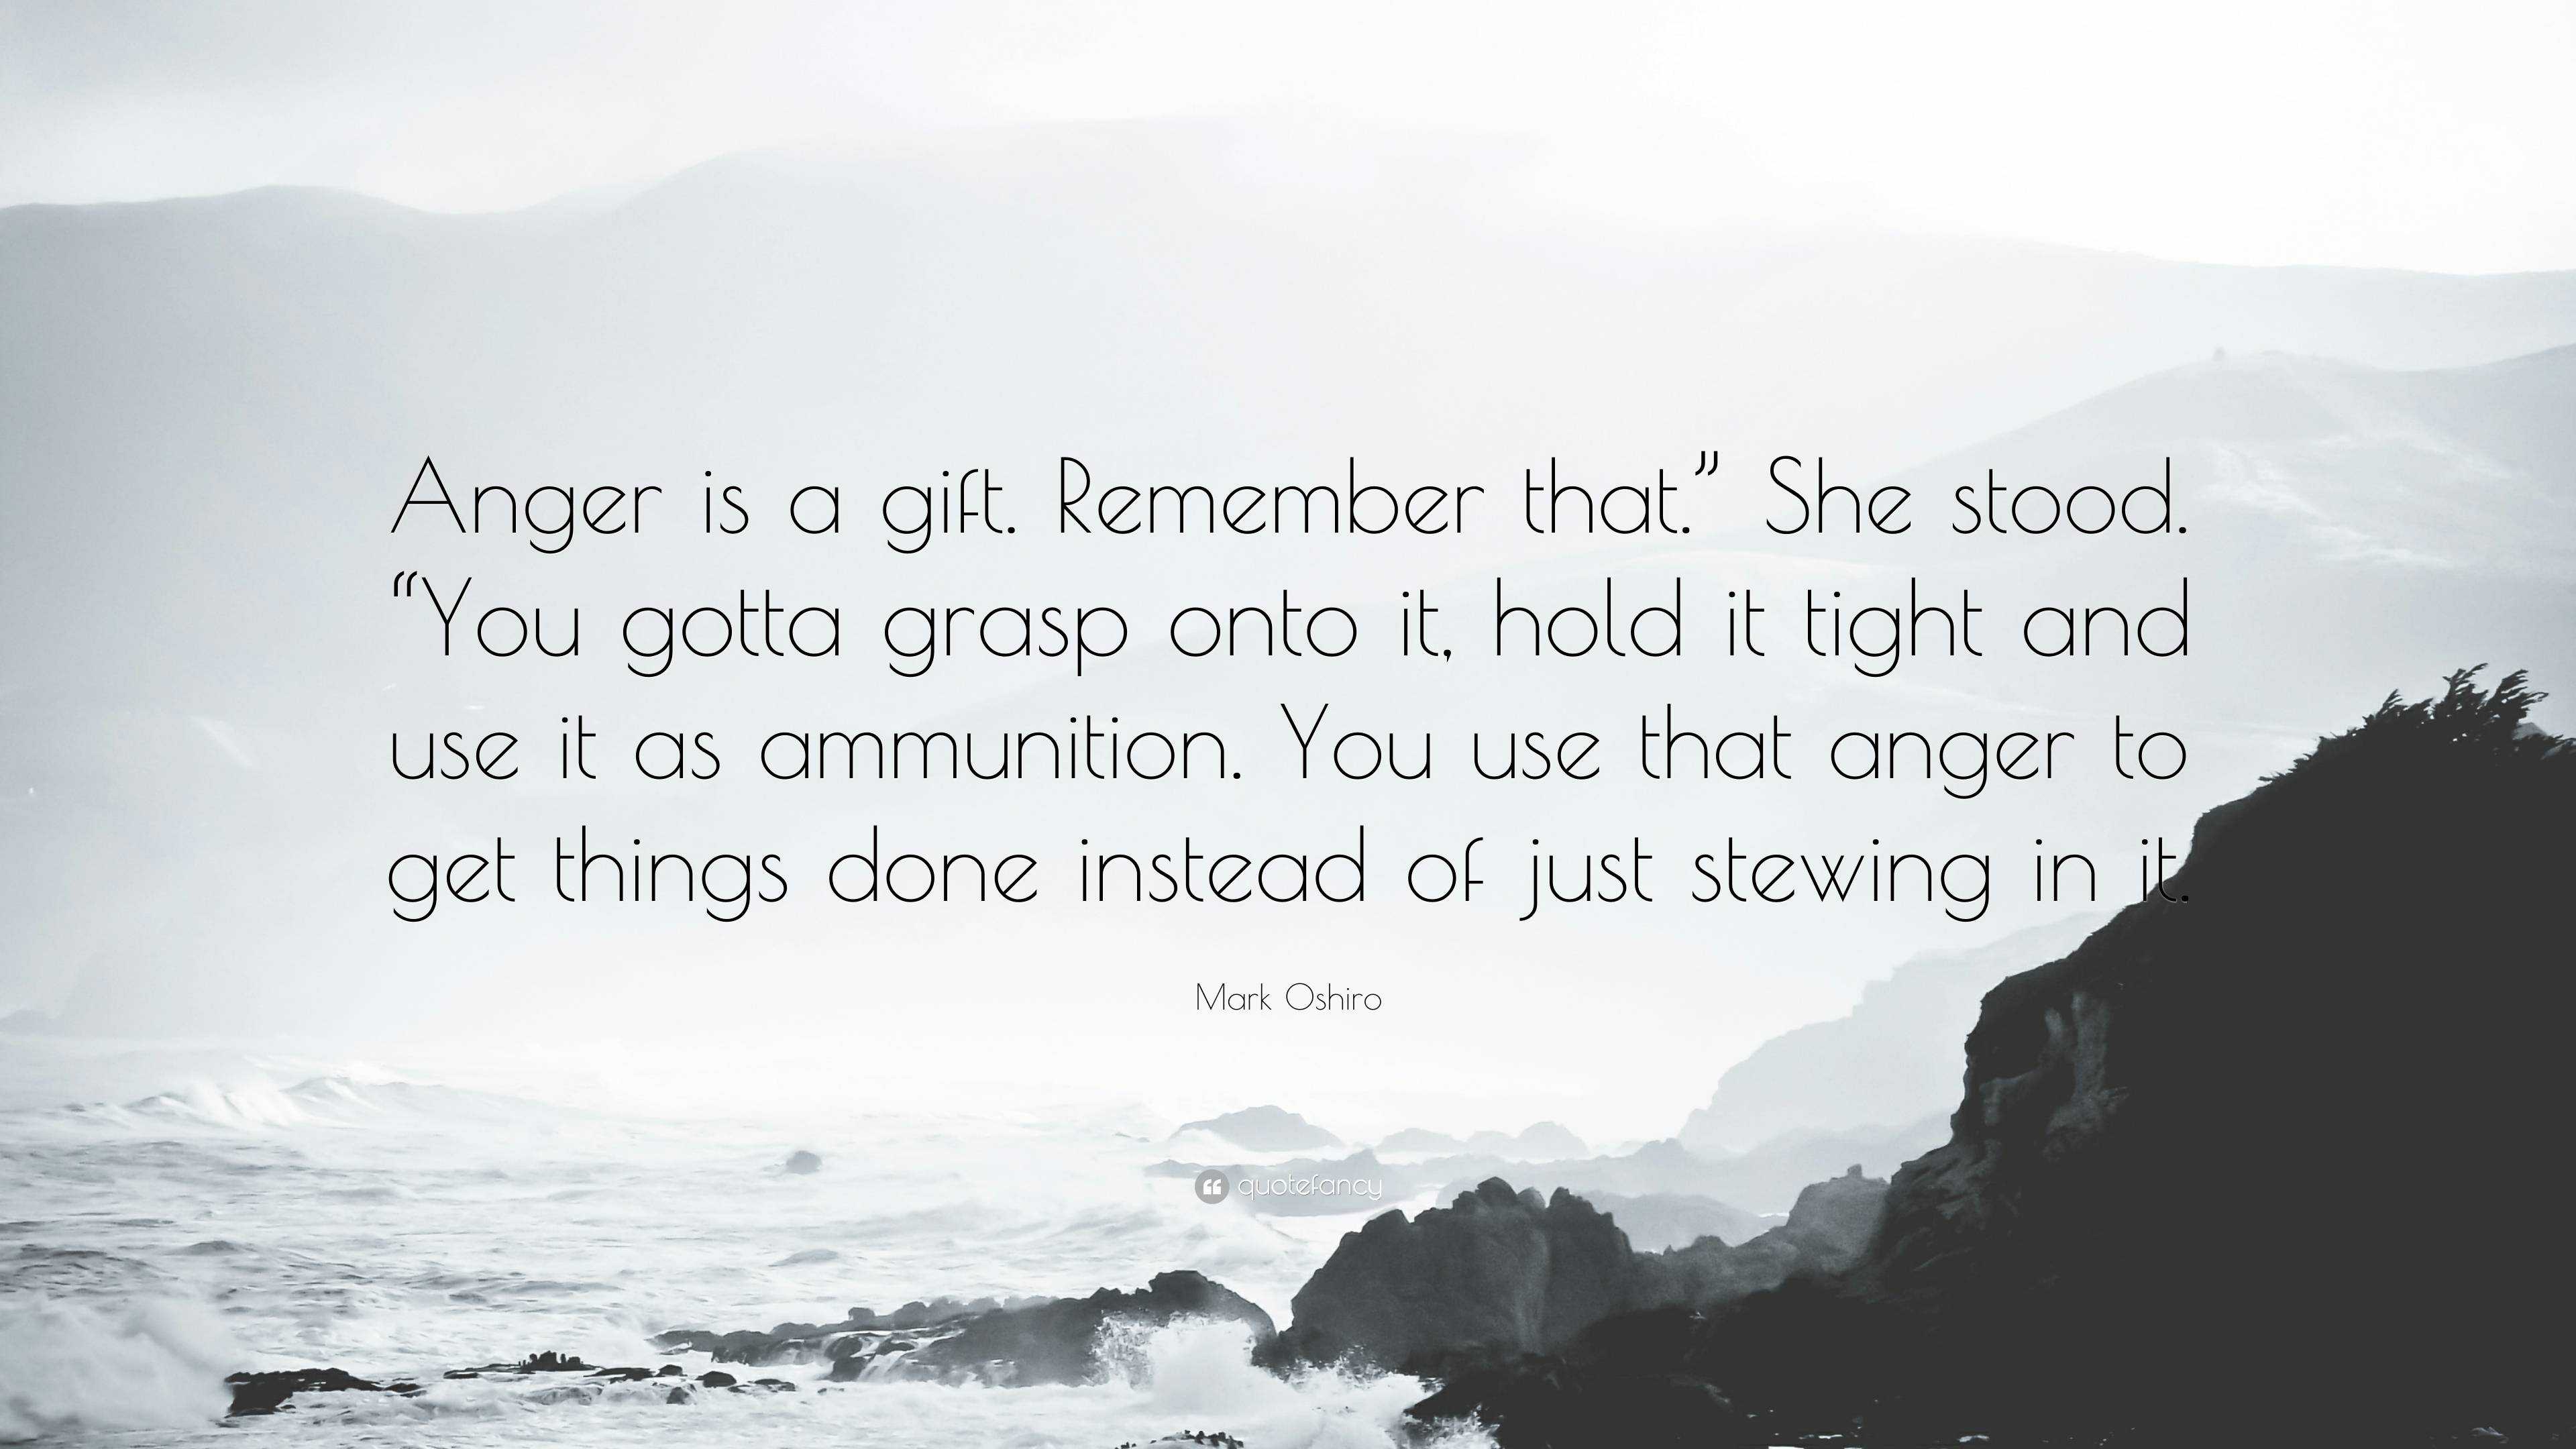 Anger is a Gift by Mark Oshiro